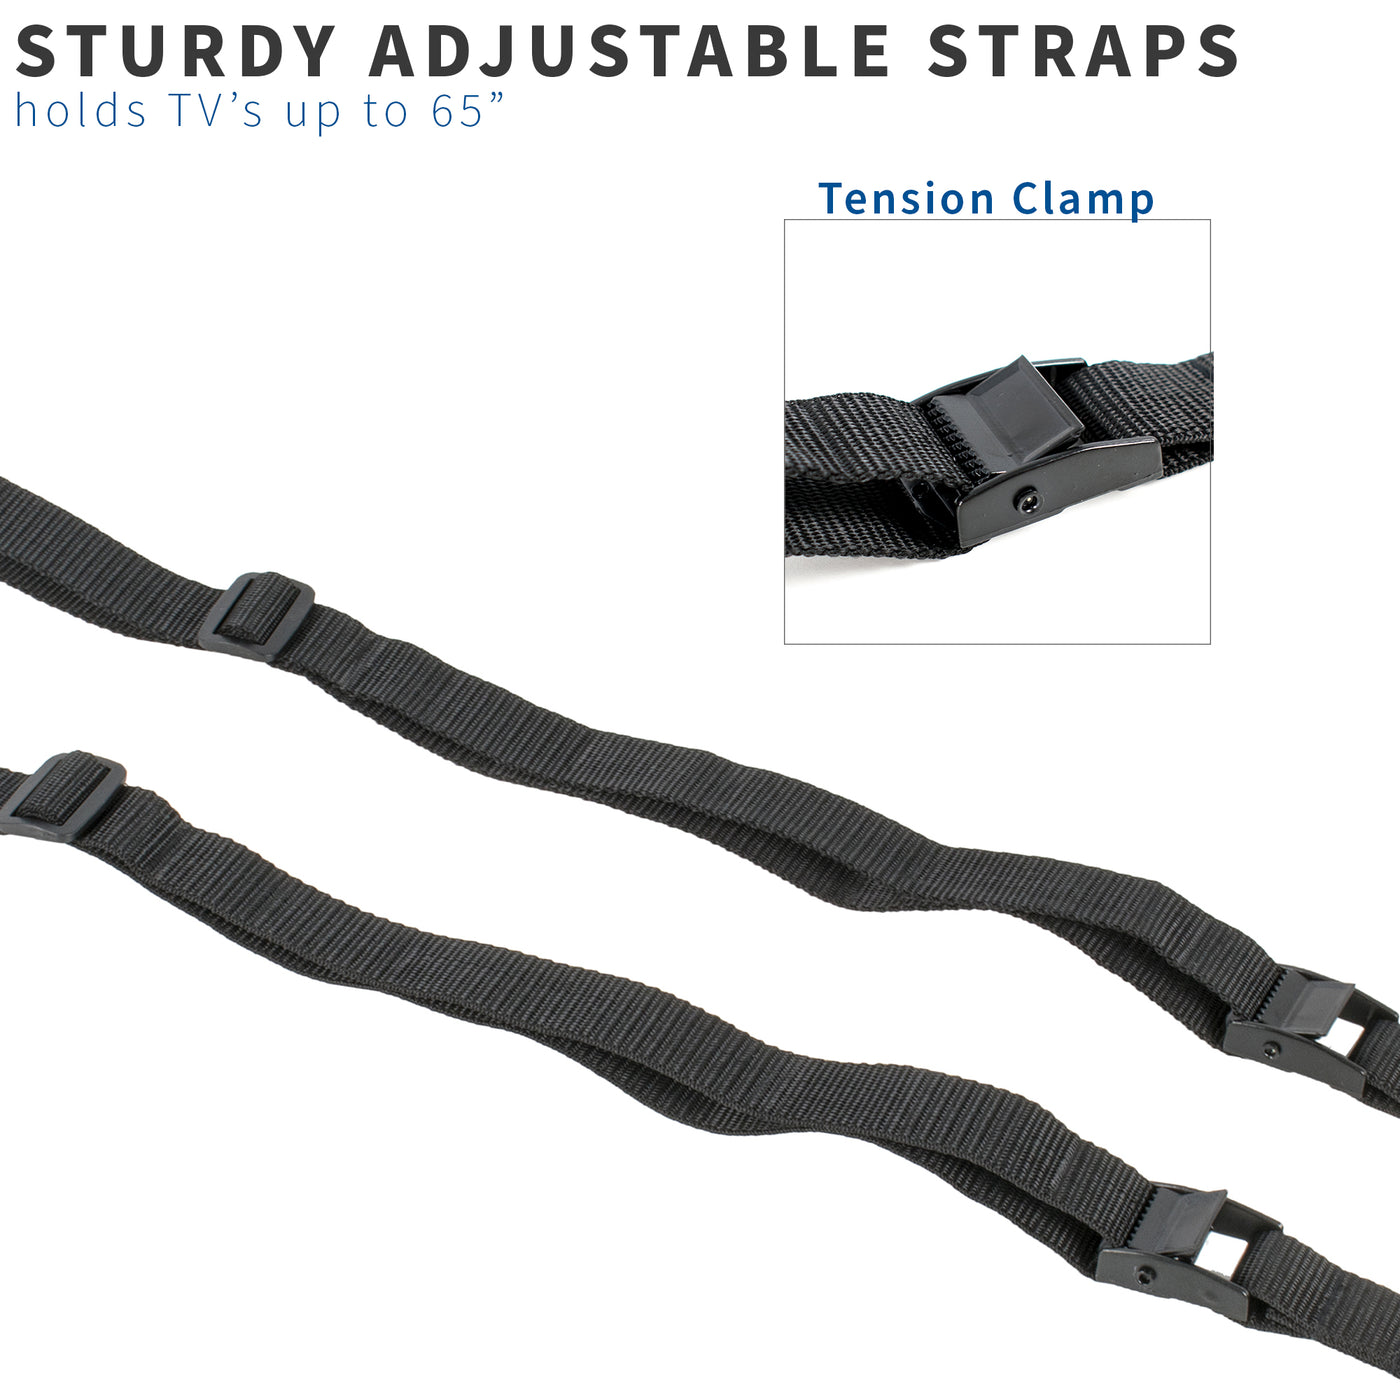 Adjustable tension clamp straps to add extra security for a TV on a stand.